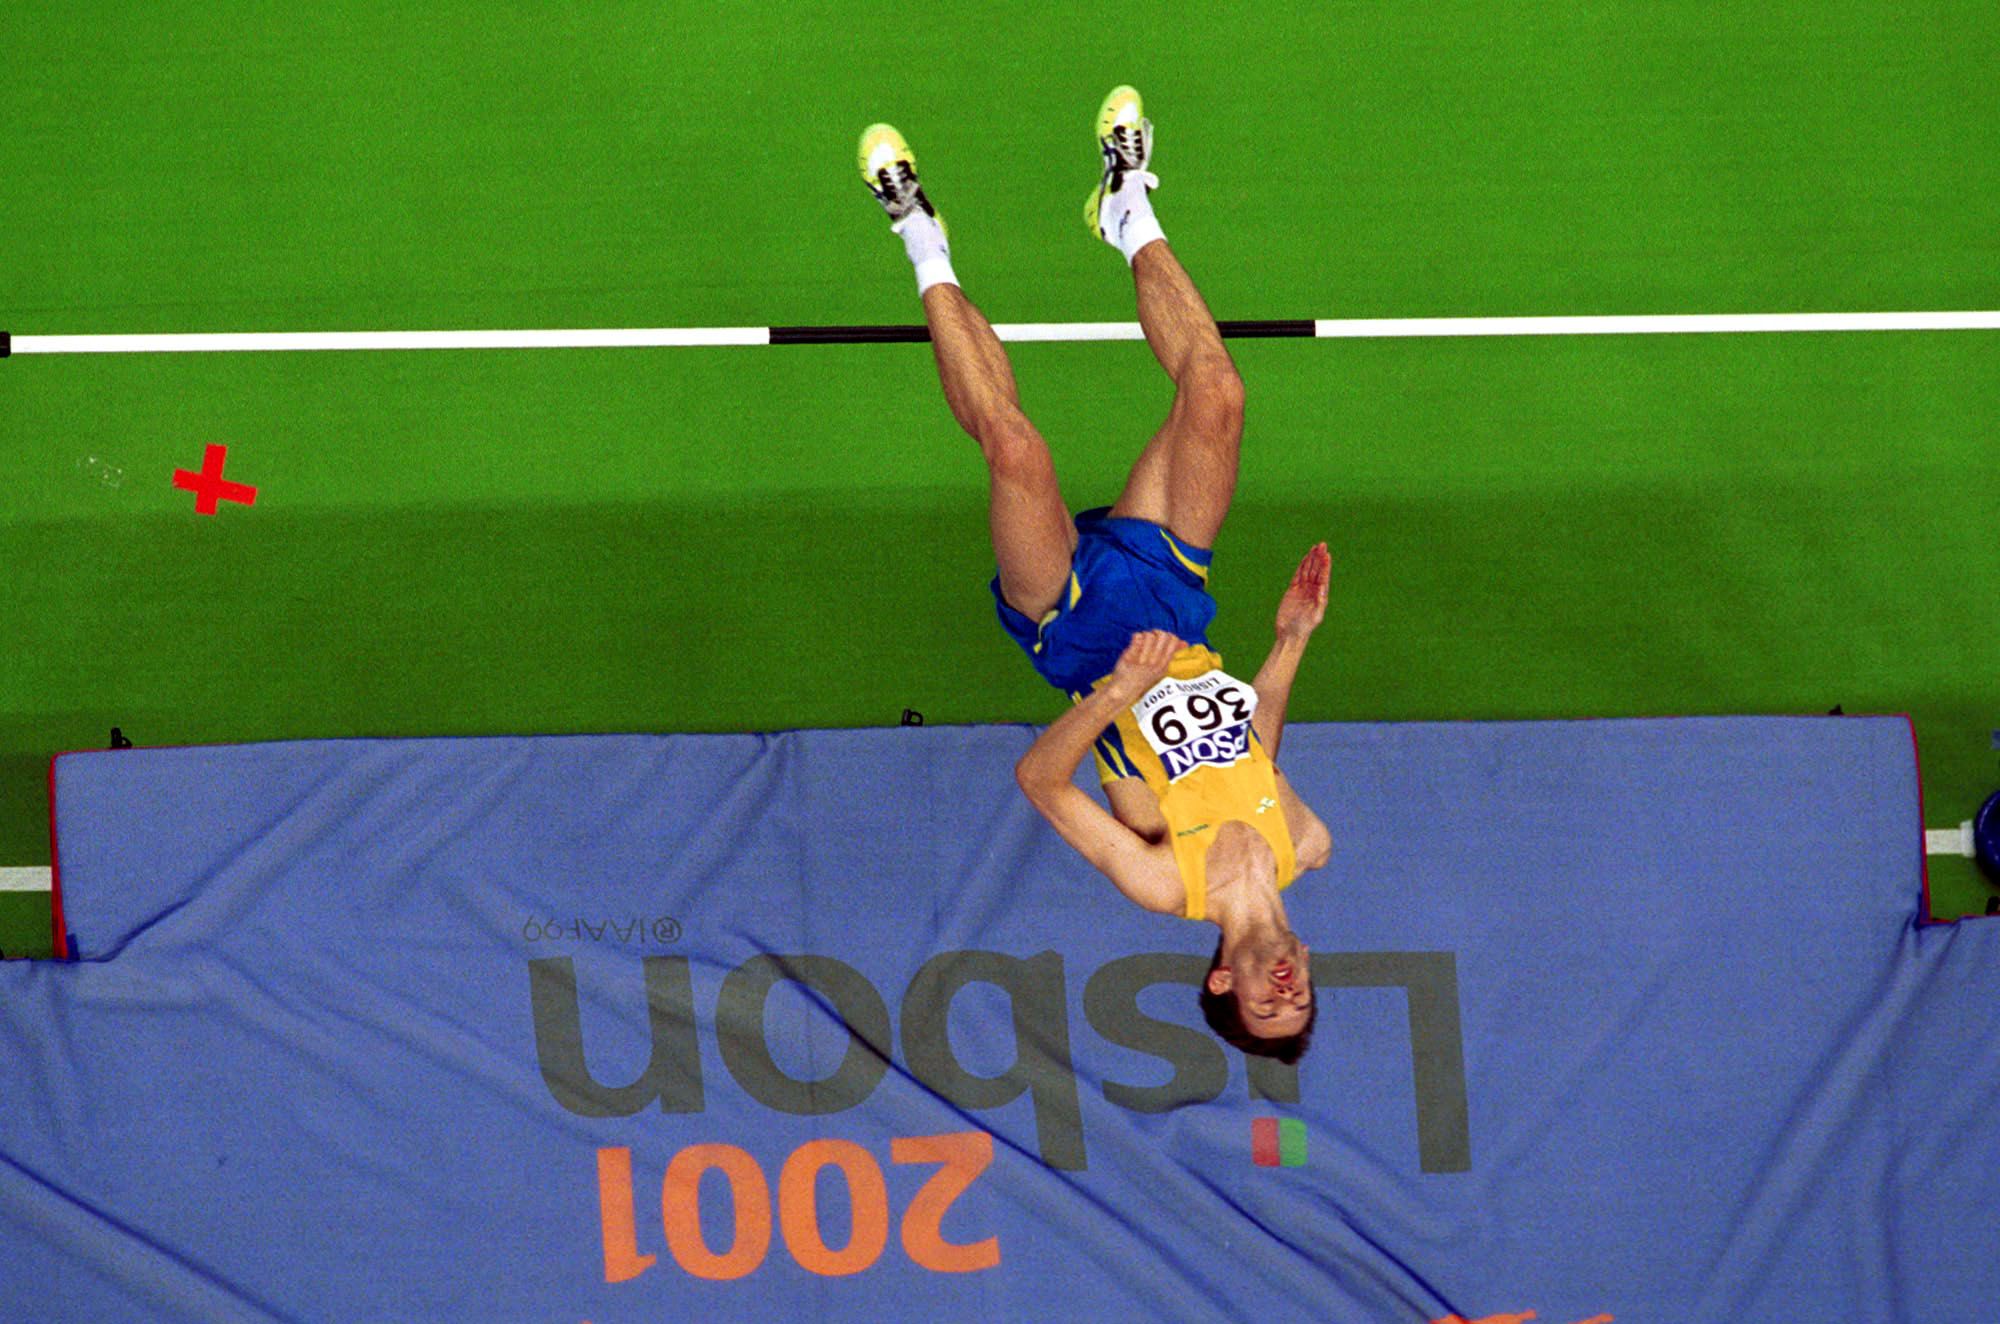 Stefan Holm in action at the 2001 World Indoor Championships in Lisbon